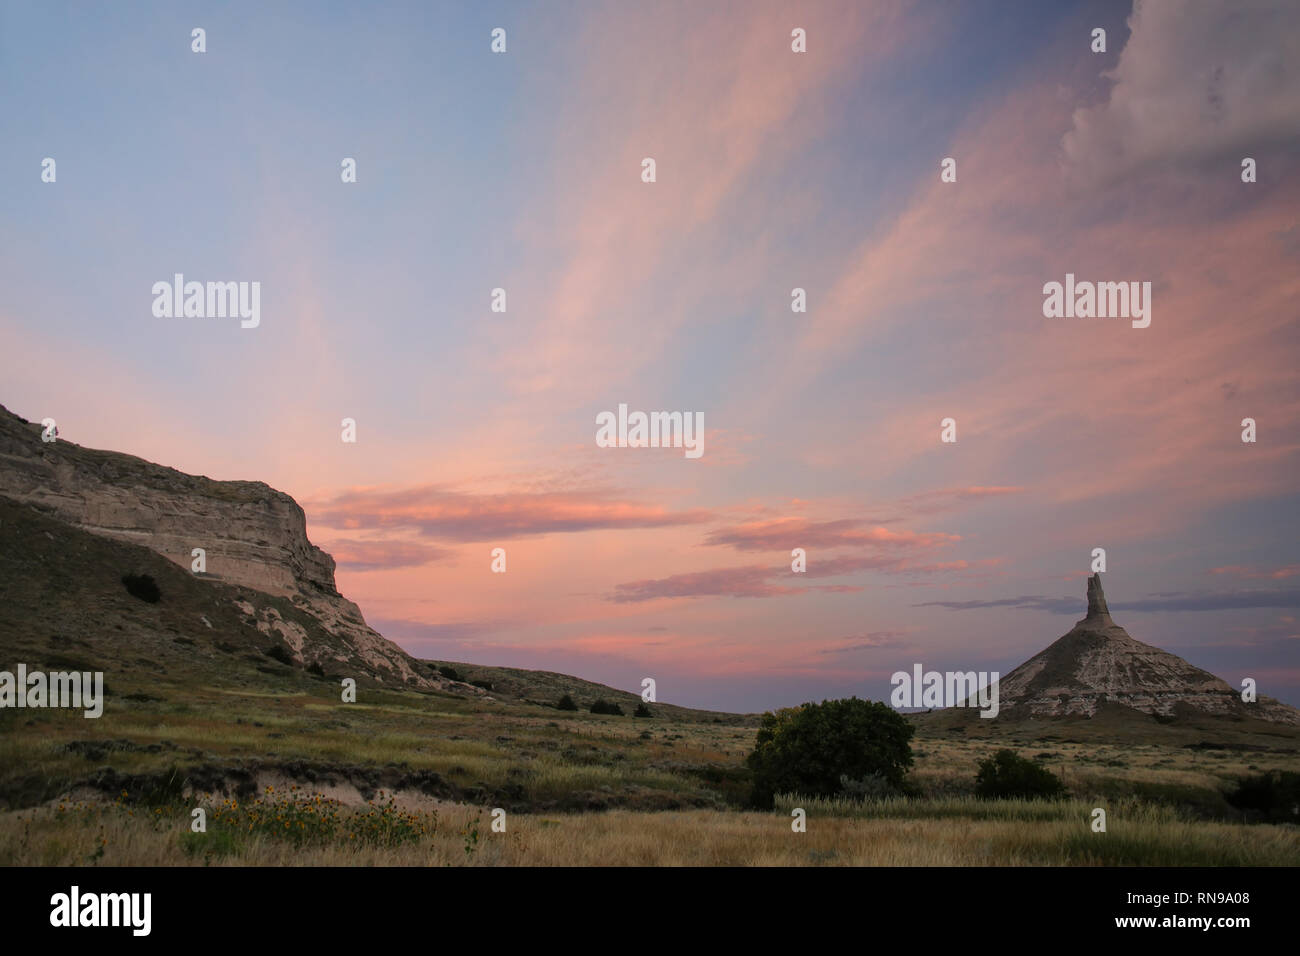 Chimney Rock National Historic Site in early morning, western Nebraska, USA. The peak of Chimney Rock is 1289 meters above sea level. Stock Photo